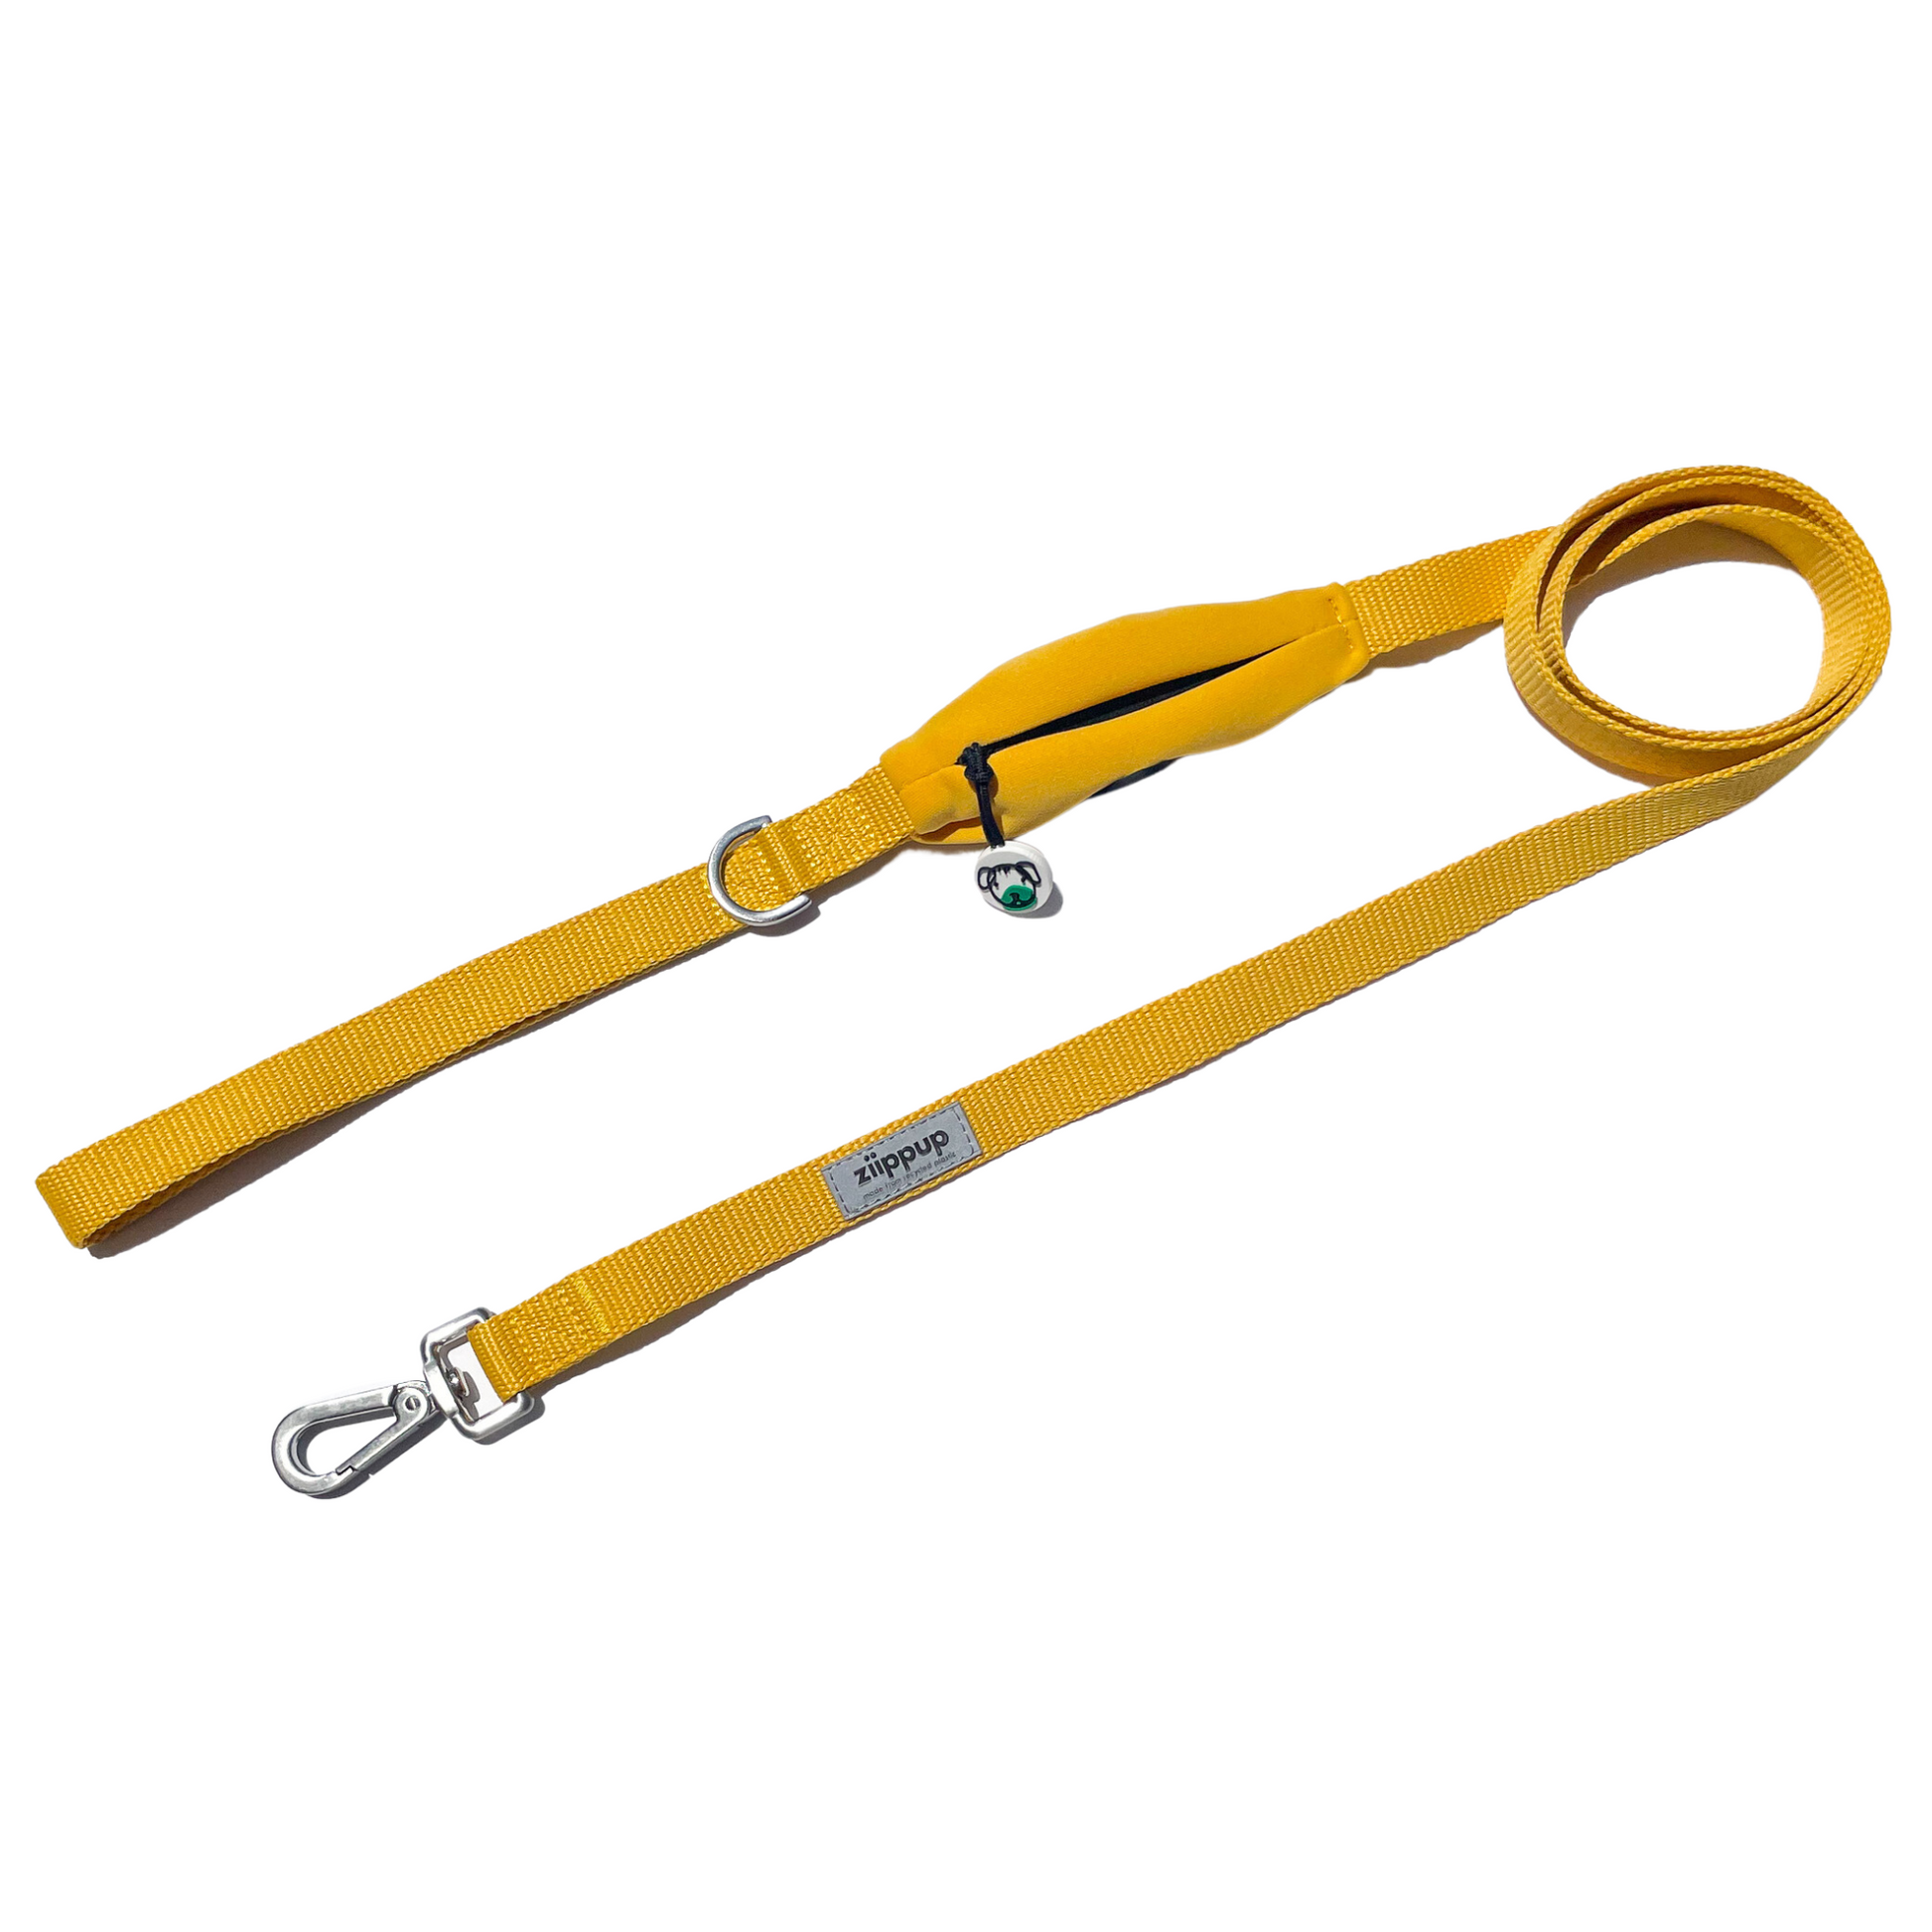 Yellow dog lead with built-in poop bag holder